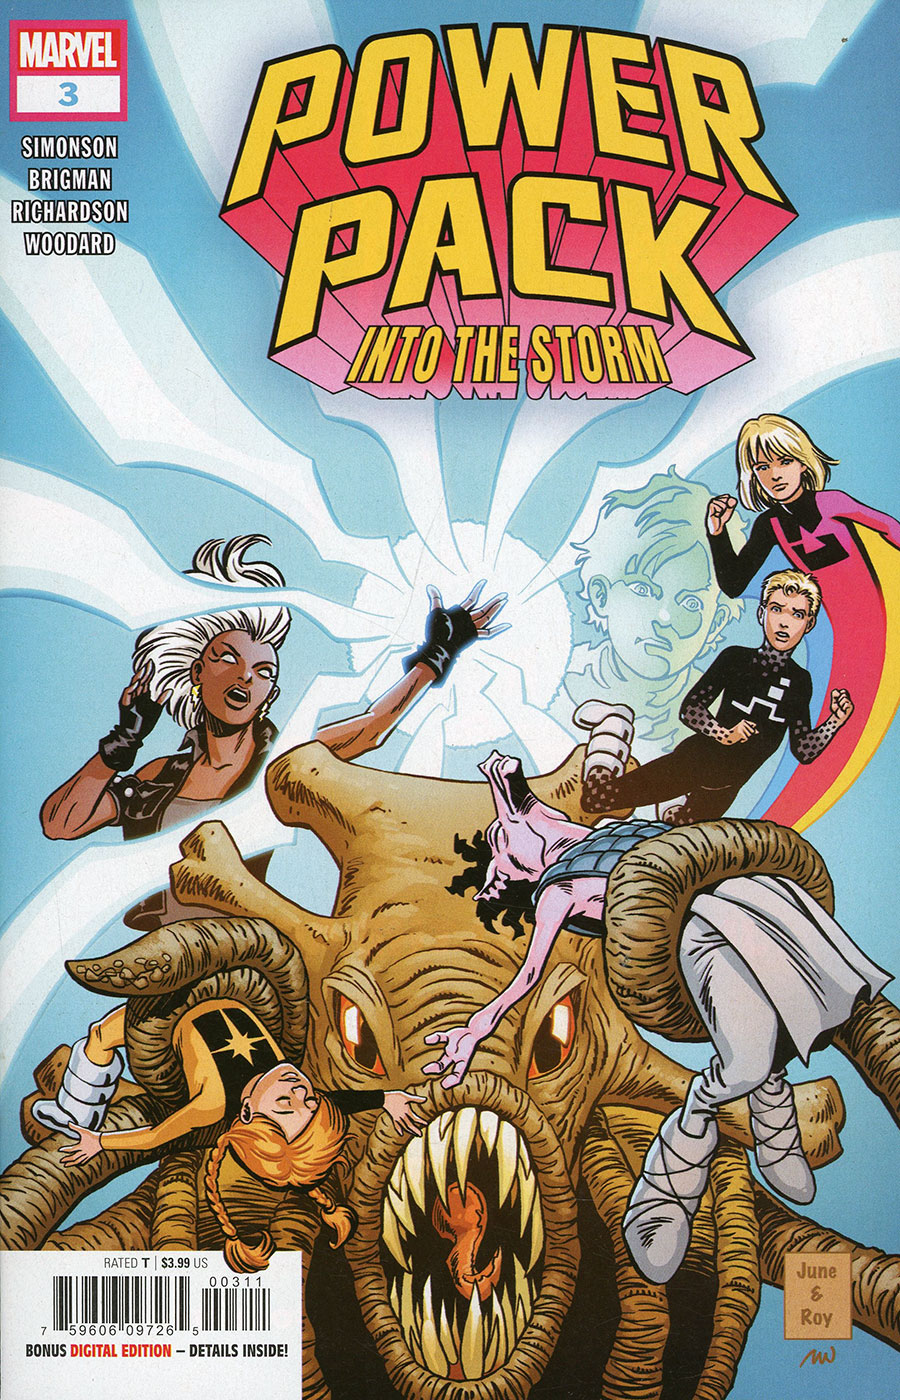 Power Pack Into The Storm #3 Cover A Regular June Brigman Cover